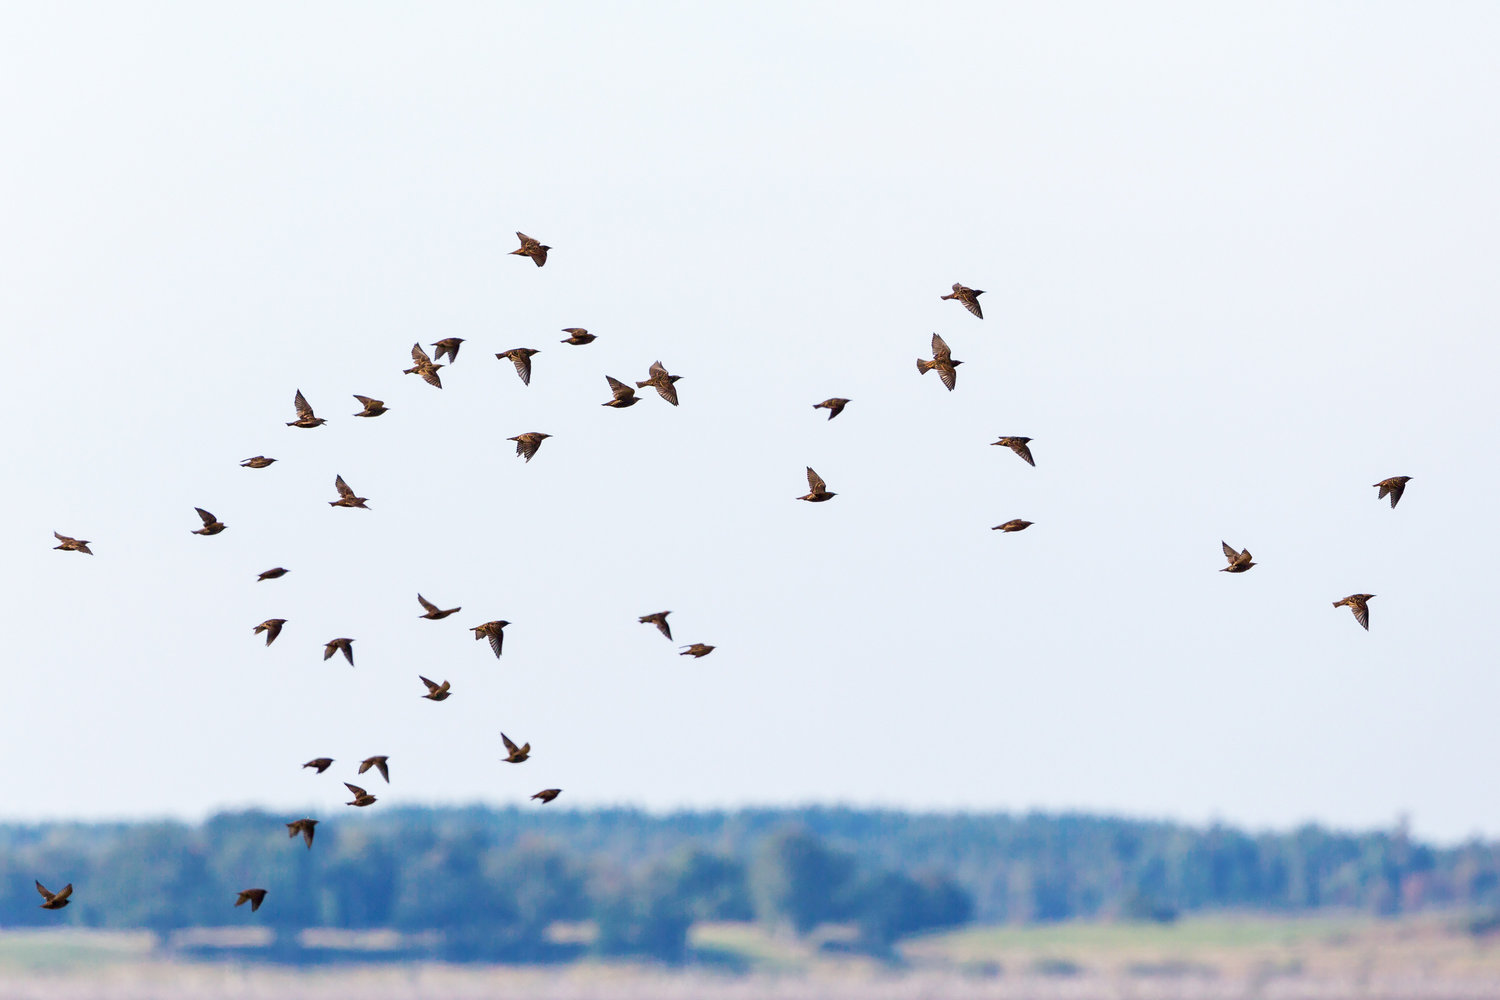 A flock of starlings. A mysterious disease has killed many birds in the mid-Atlantic region.